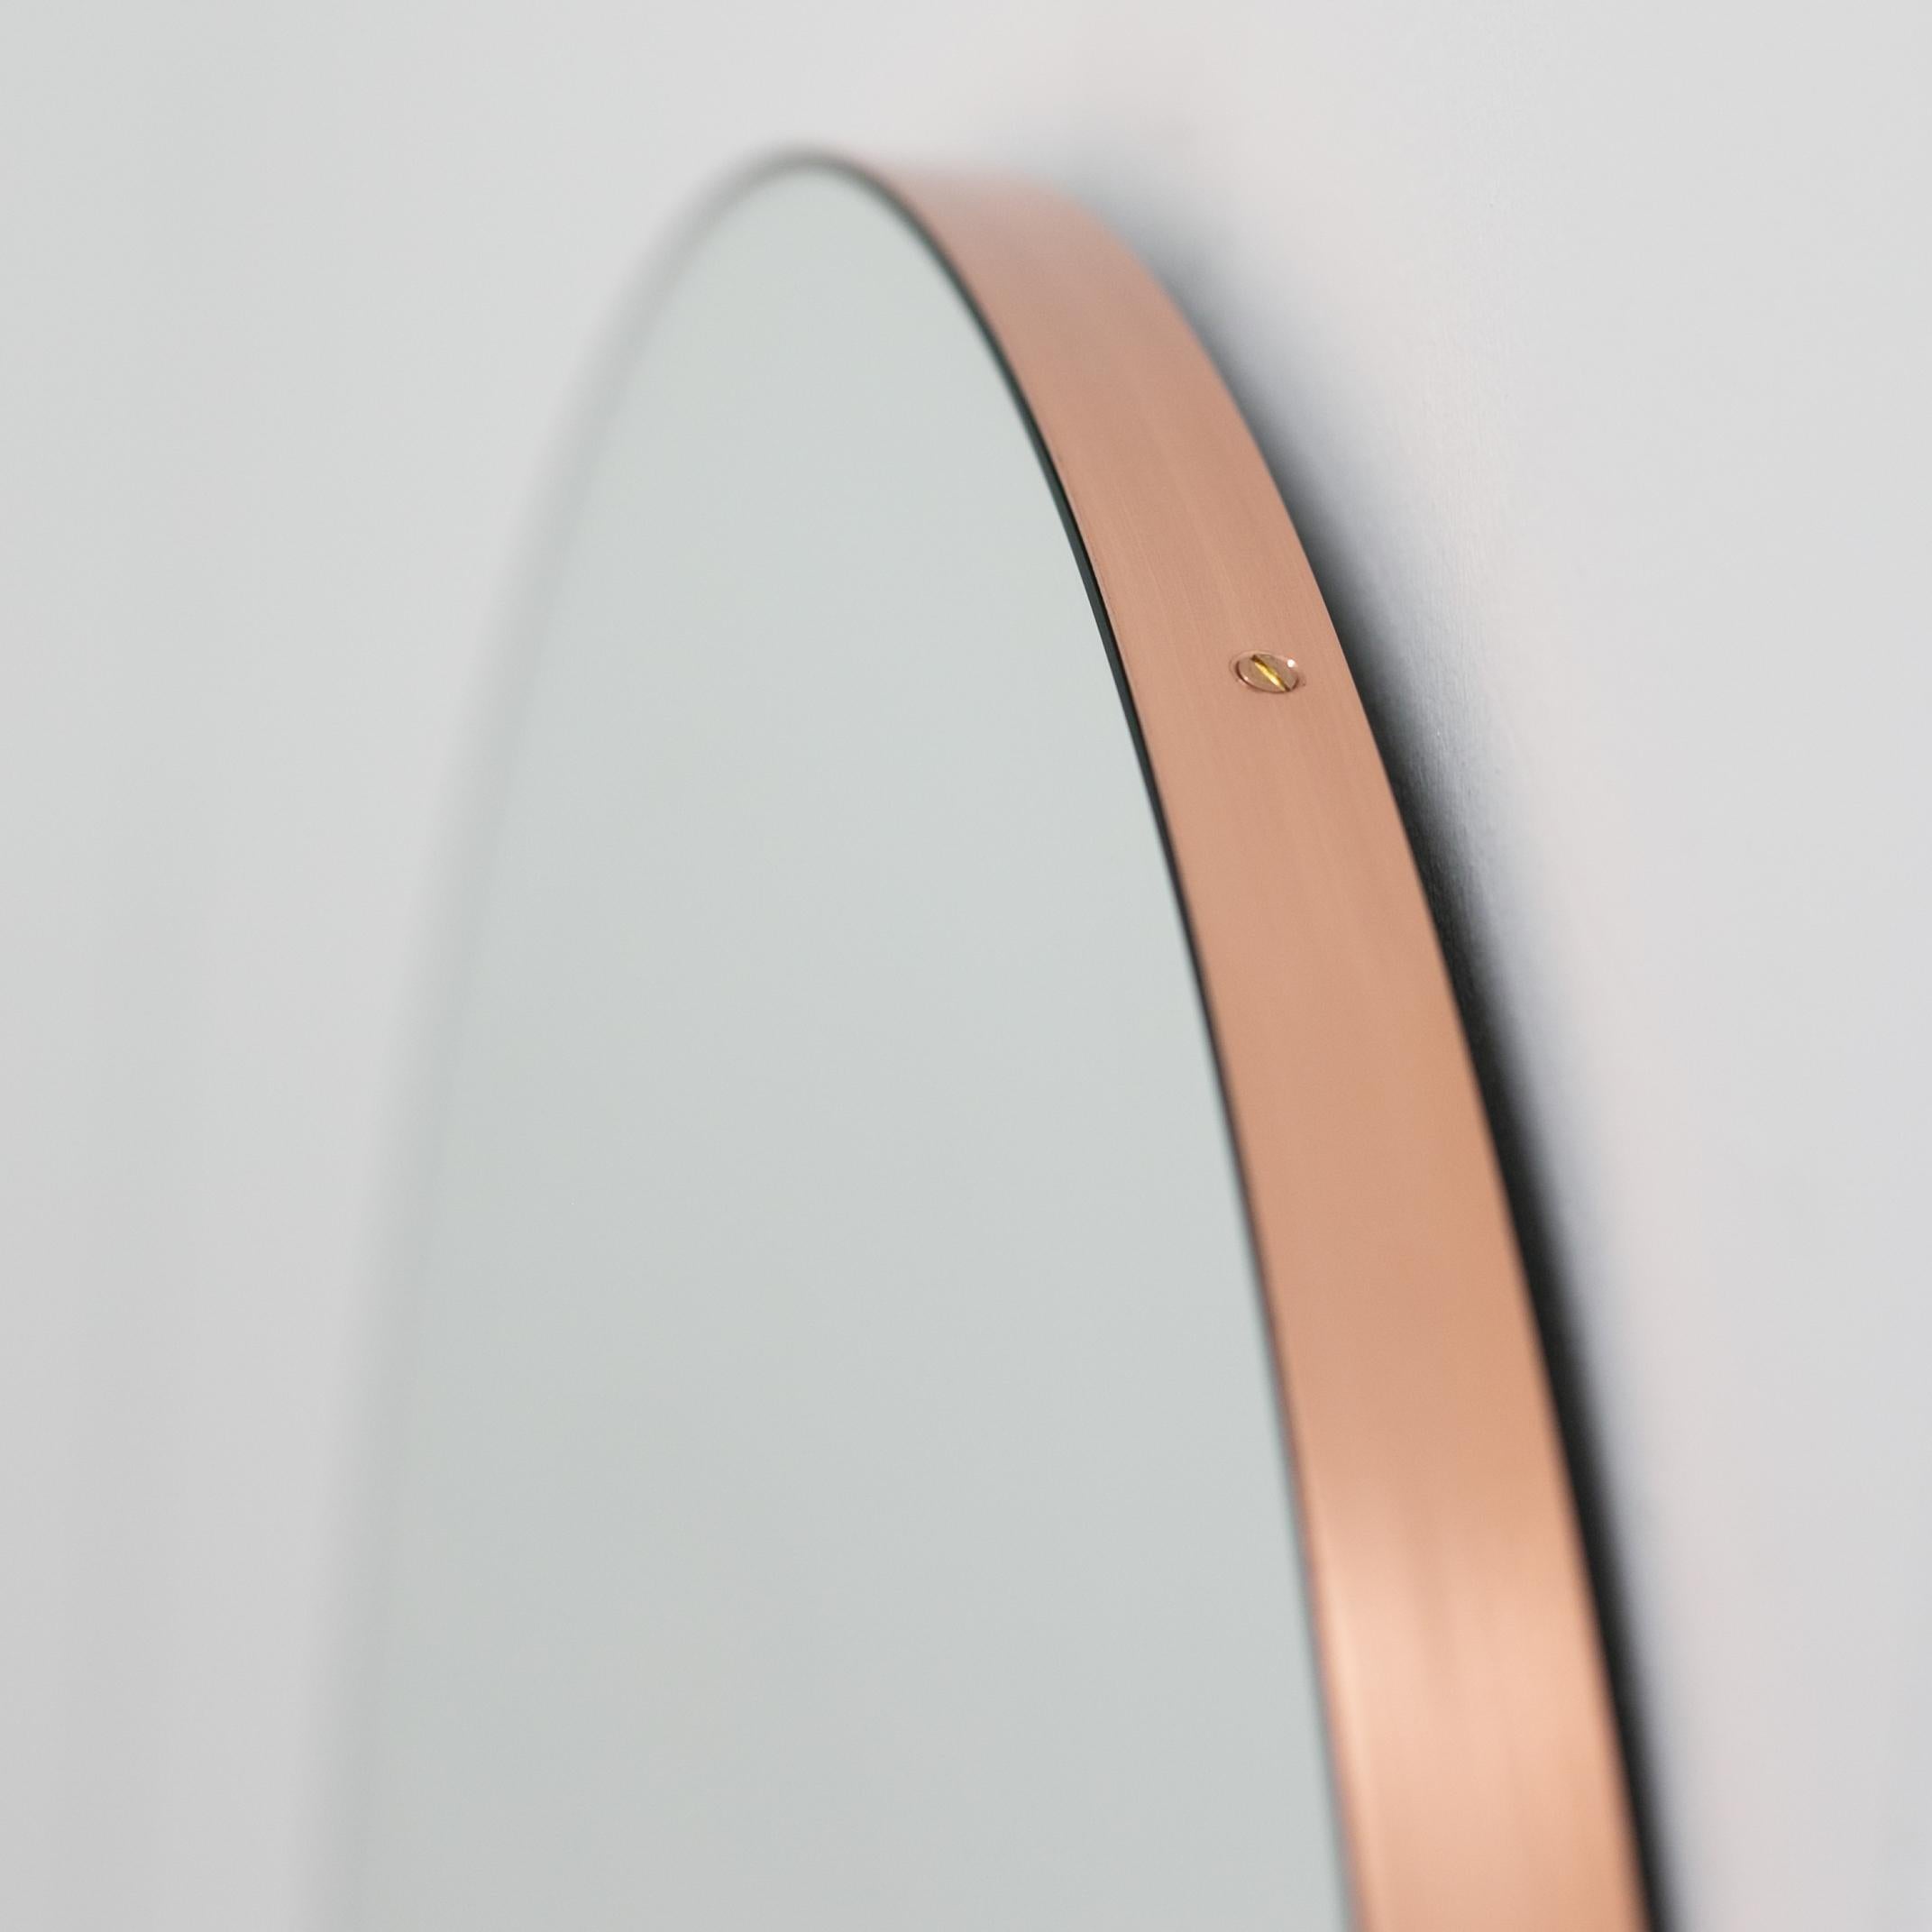 British In Stock Orbis Round Handcrafted Mirror with Copper Frame, Medium For Sale